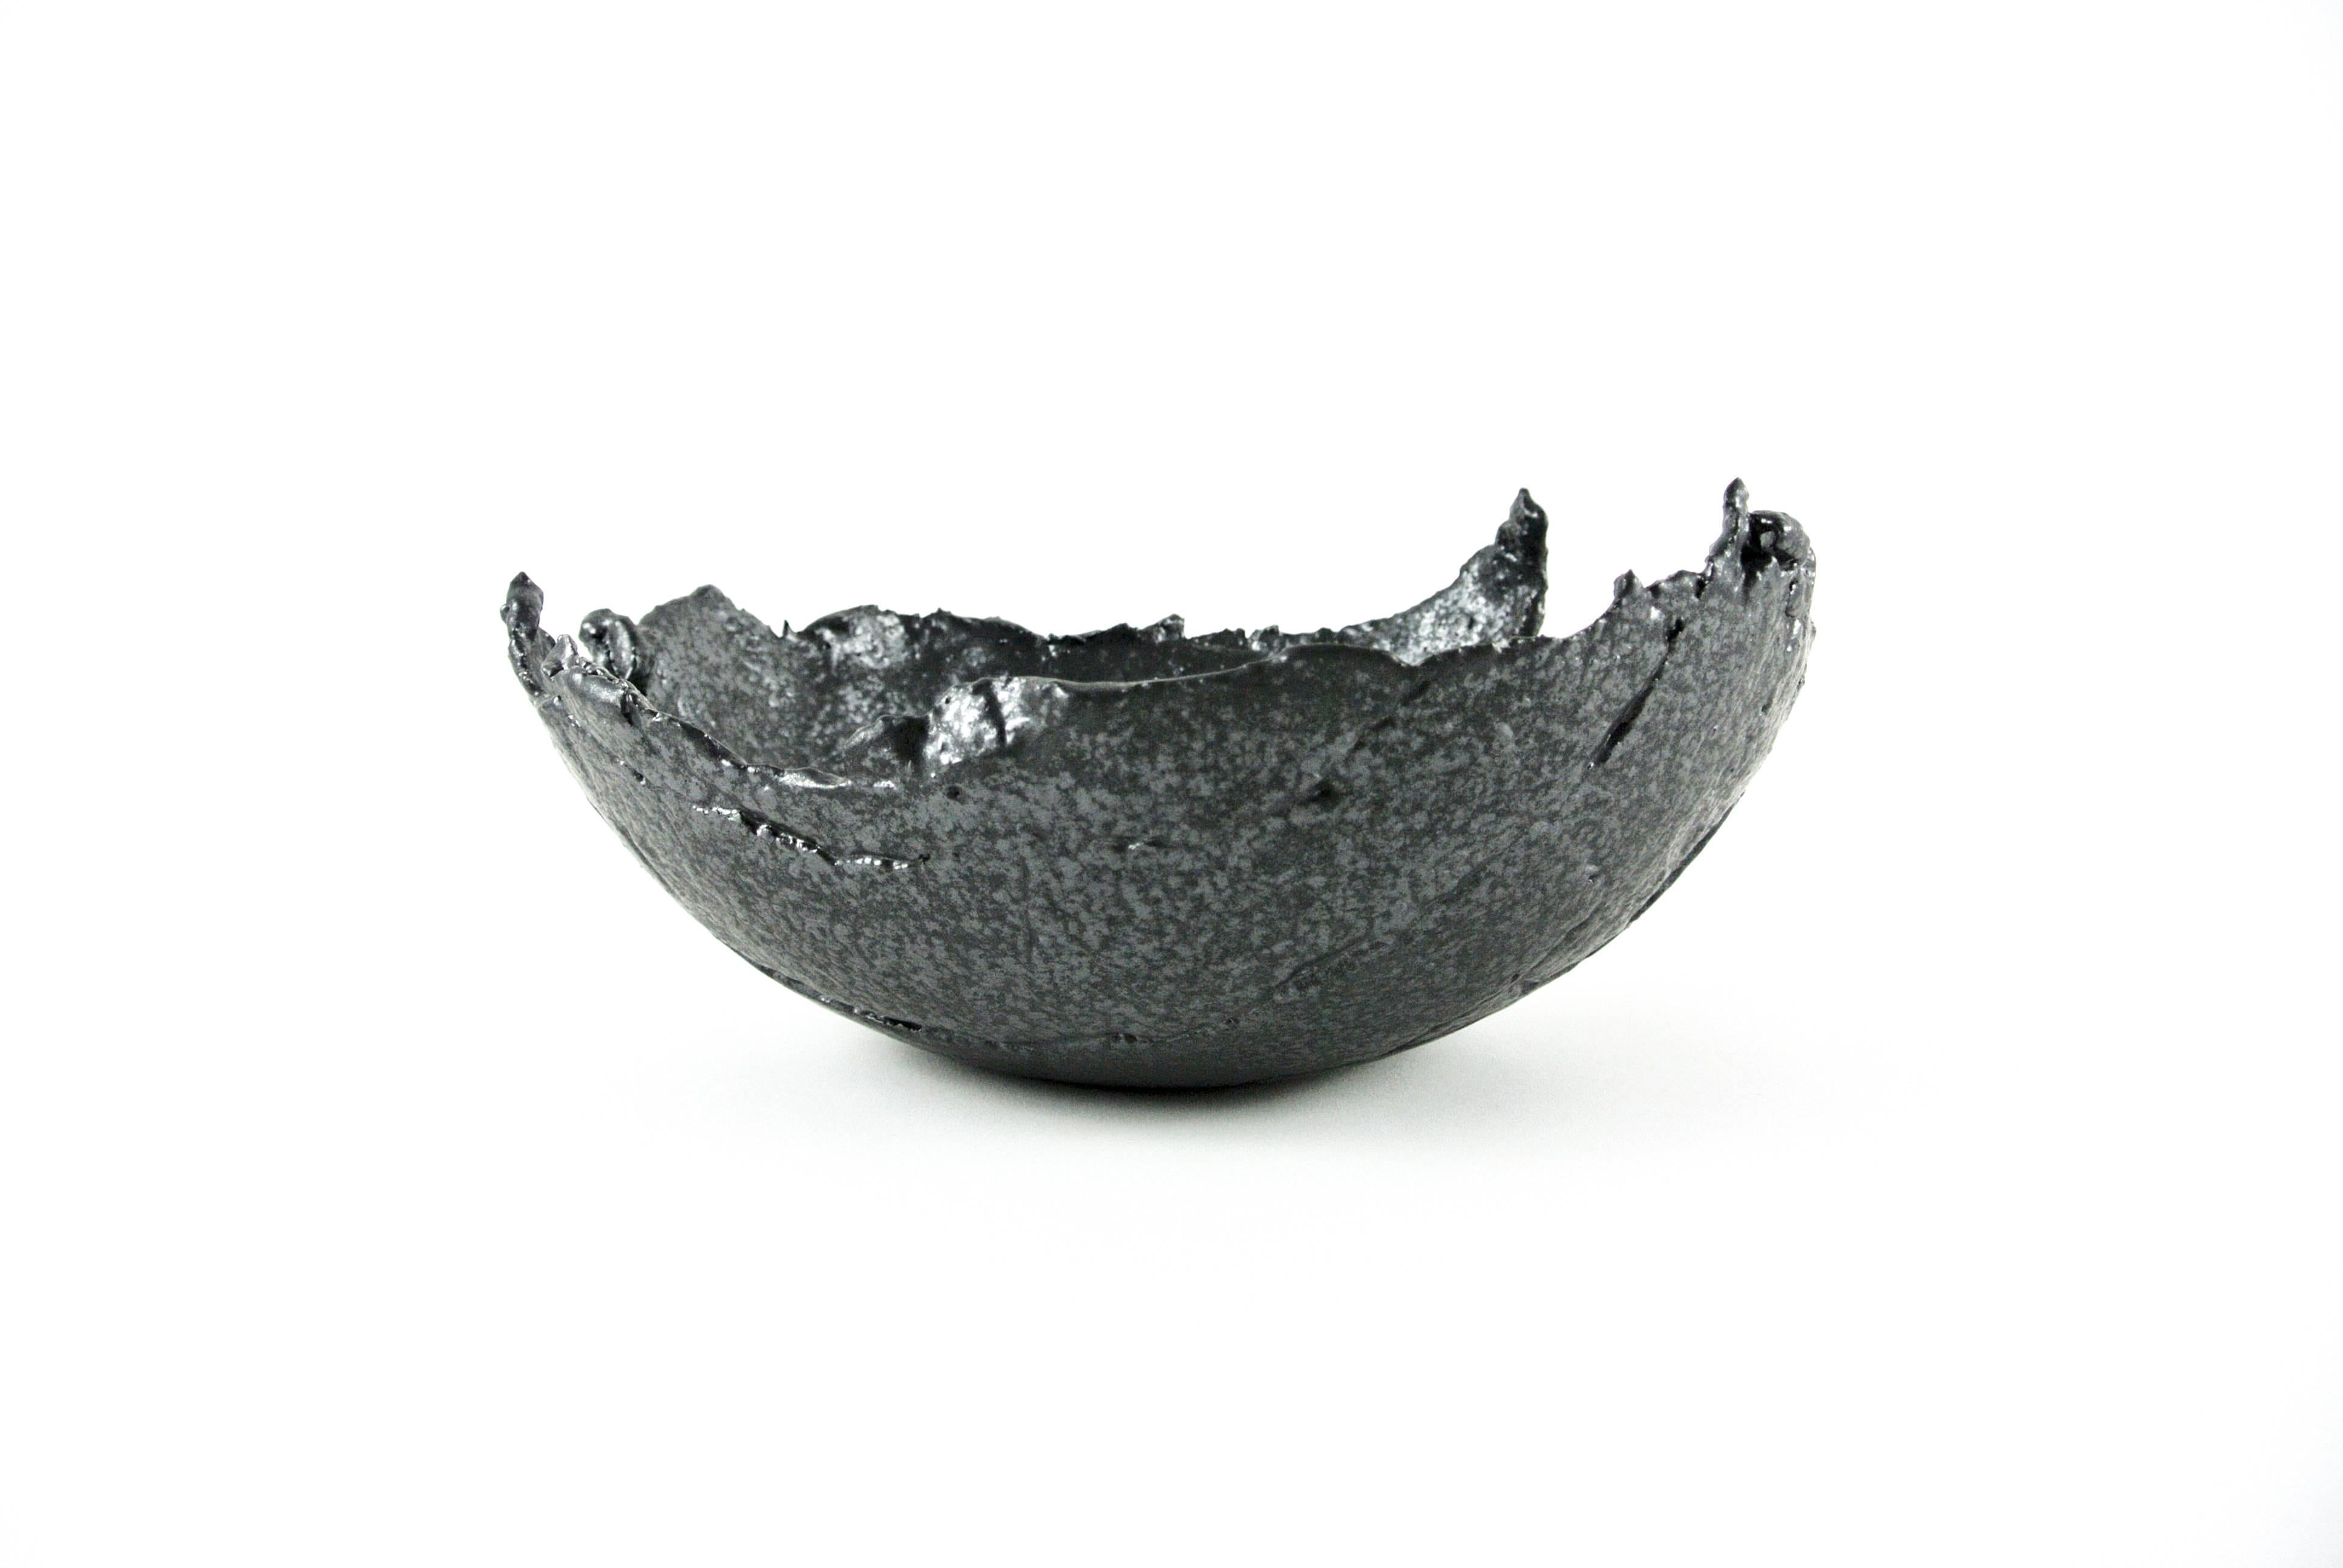 Rough grey stoneware bowl with raw and asymmetric edges (ca 32 x 31 x 14cm) and black silvery glaze. Fire sand texture as well as pleats visible on surface.
Functional or for decoration.